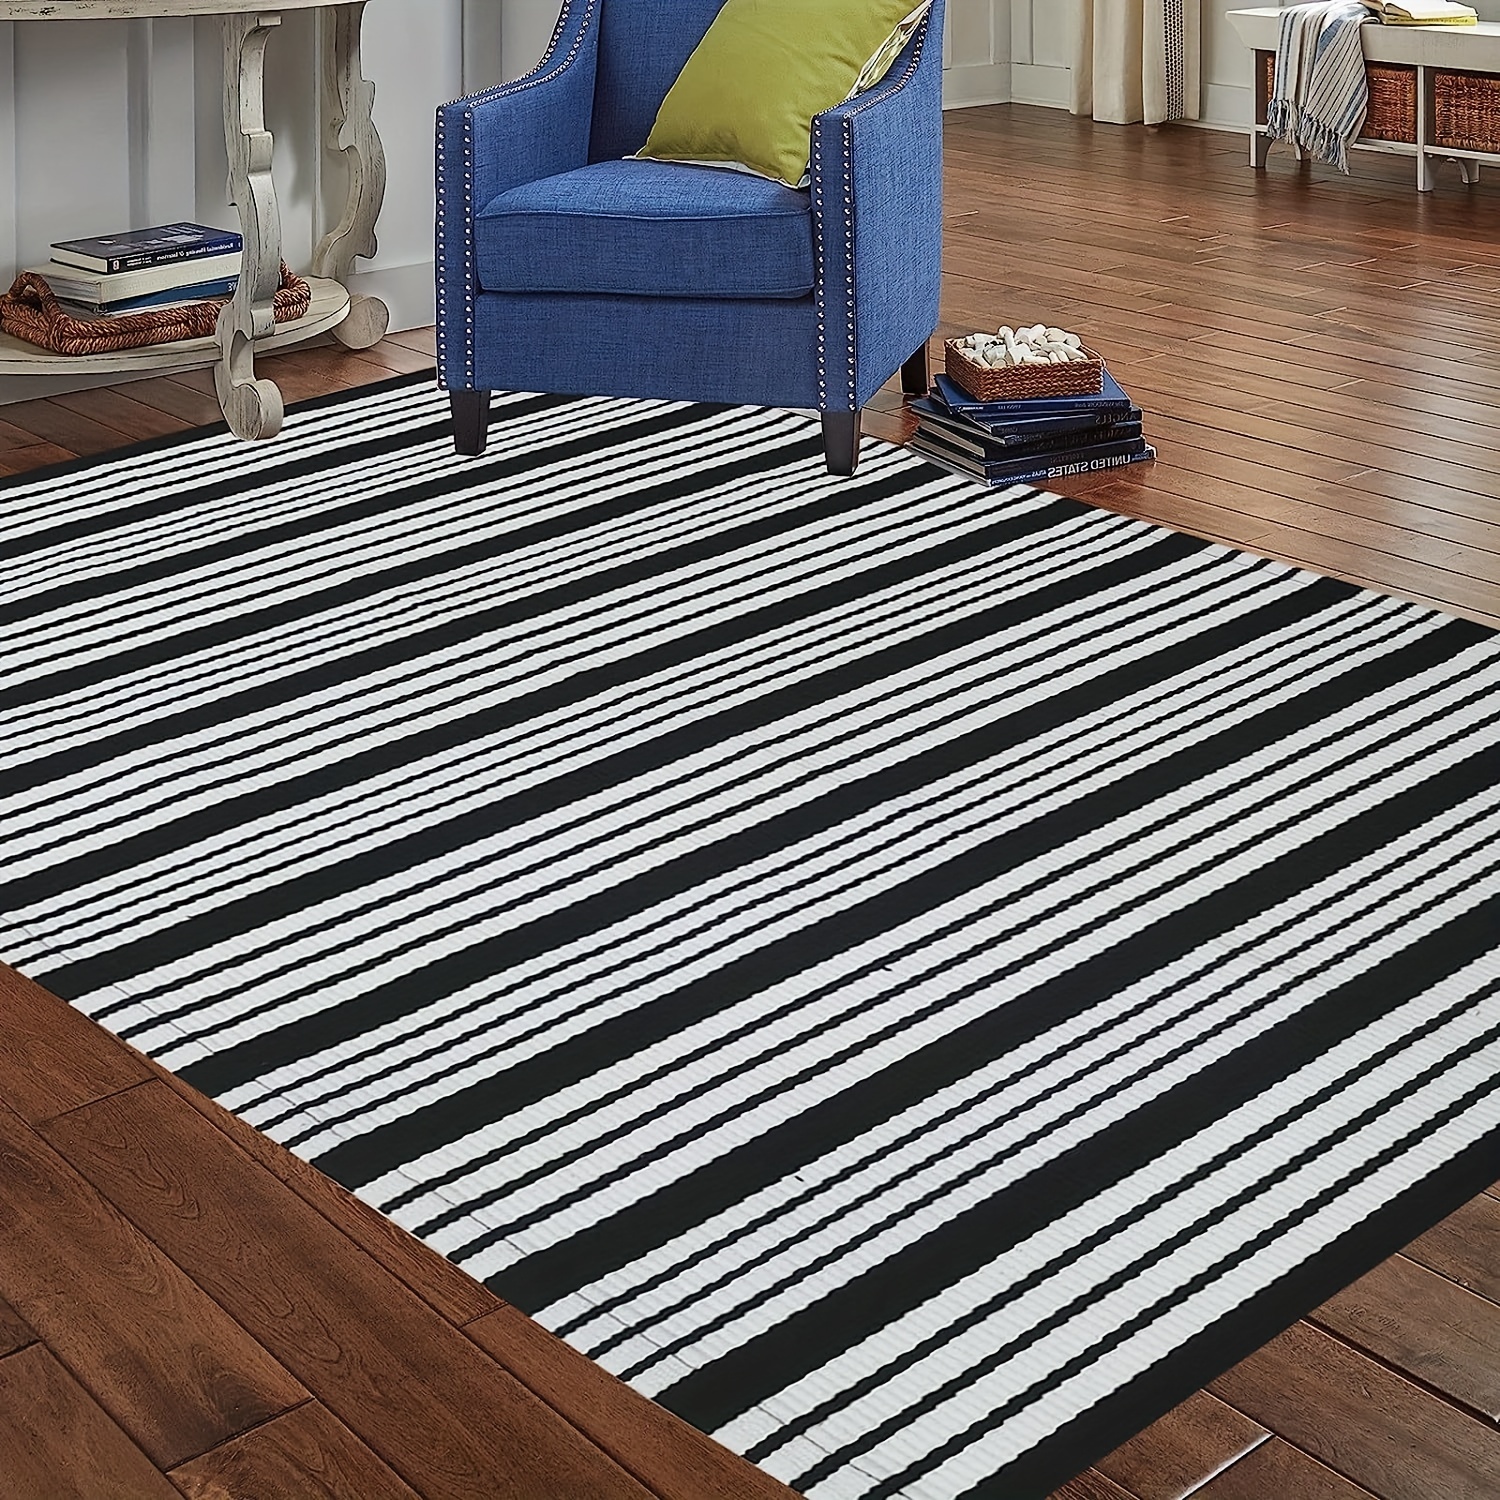  Black and White Striped Outdoor Rug Front Porch Rug